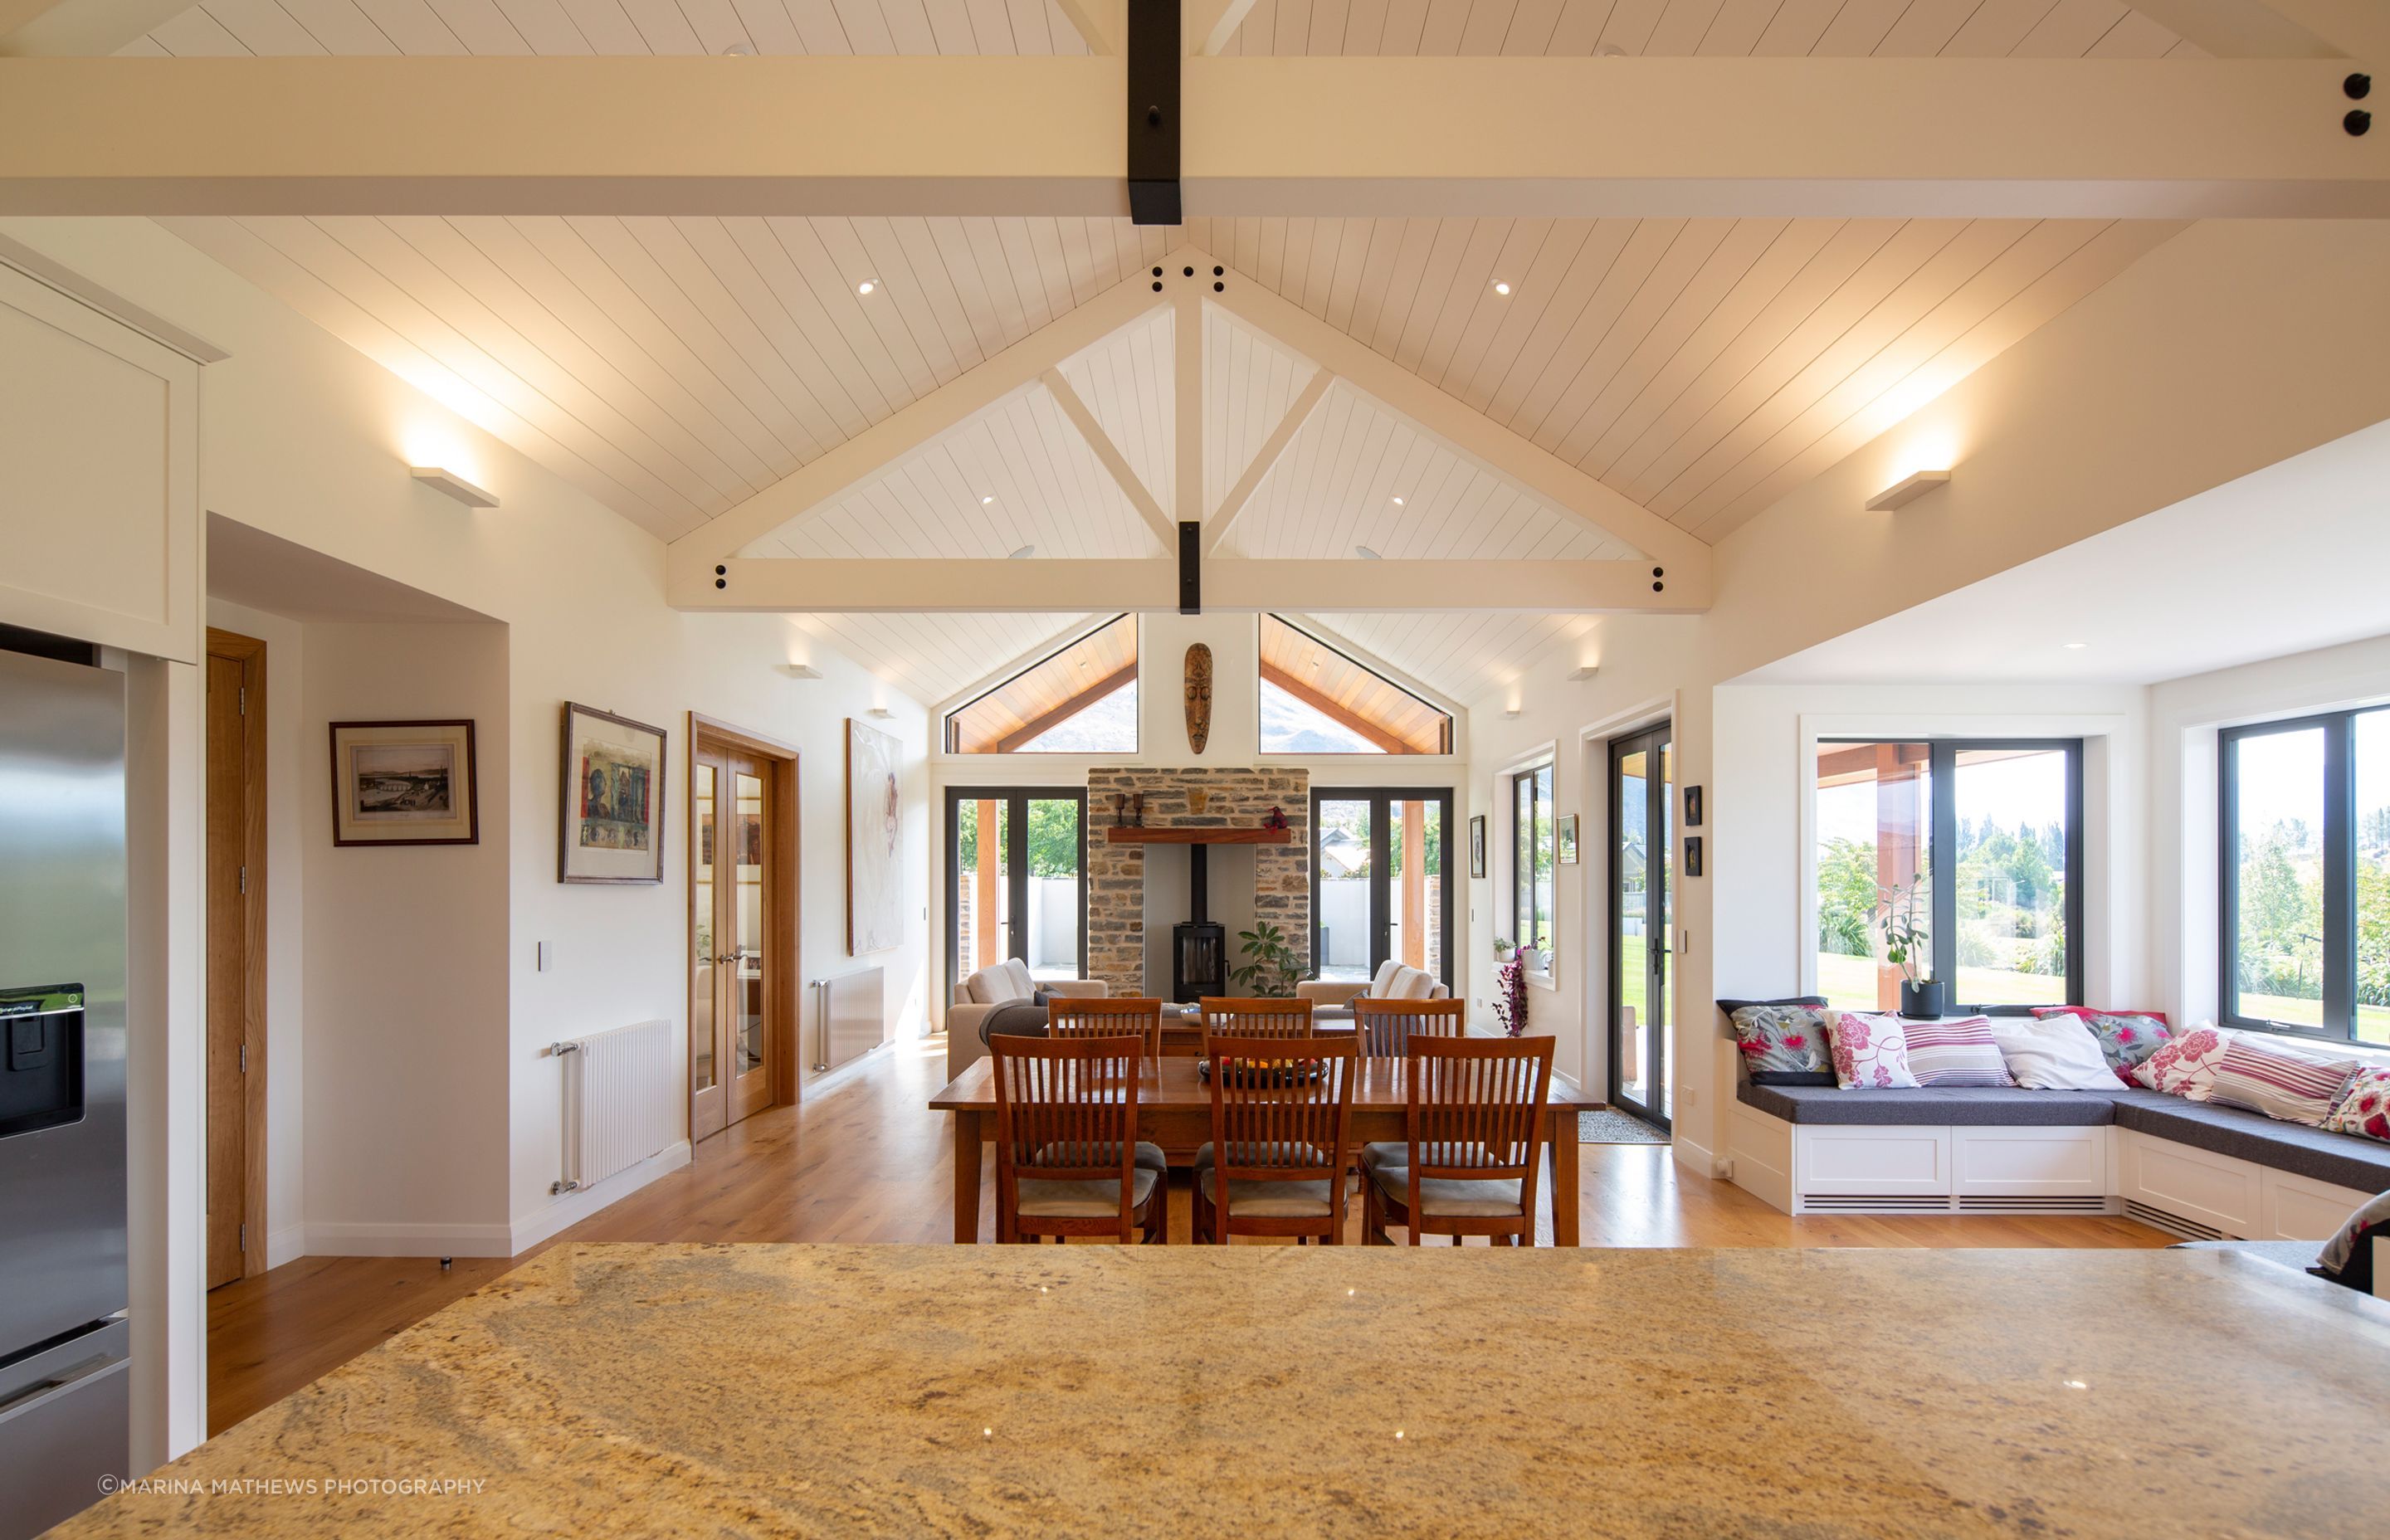 Timber trusses and sarking continue the traditional-style architecture seen on the exterior. The painted ceiling helps reflect light back into the room and contributes to the light and airy feel of the spaces.